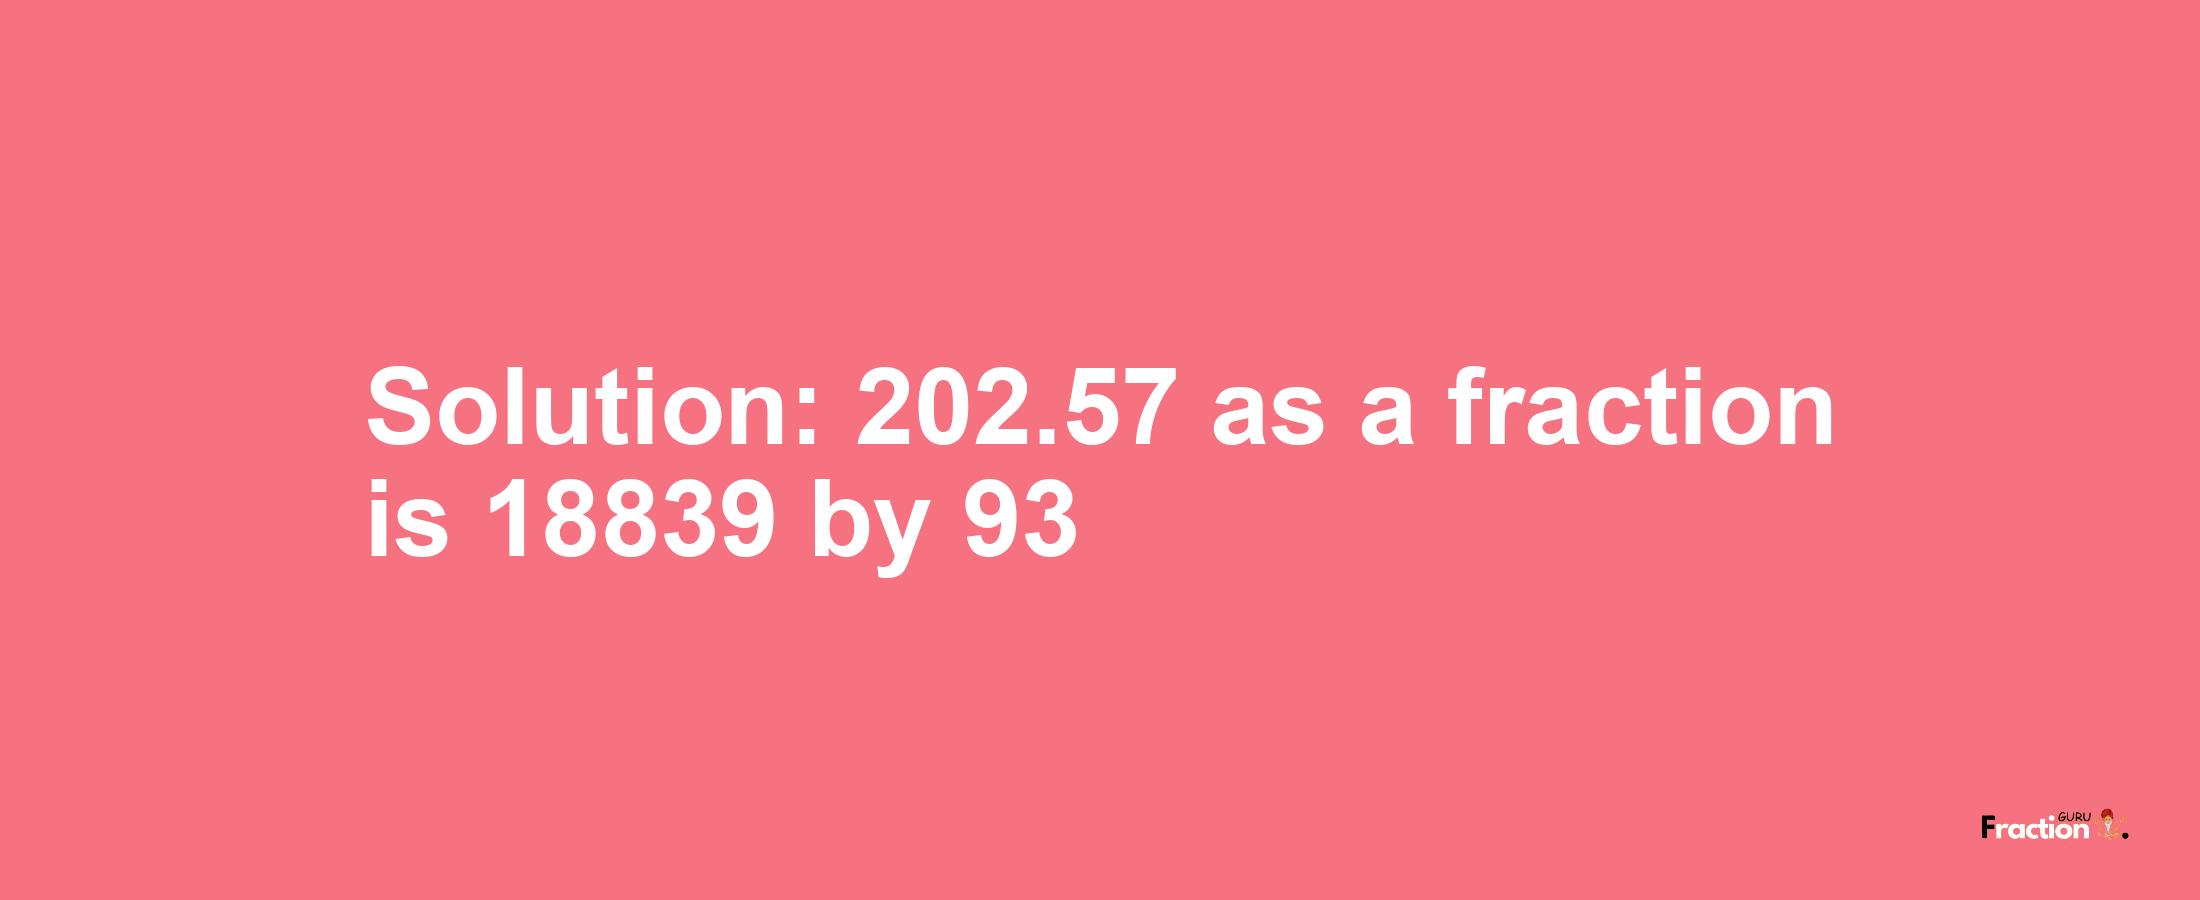 Solution:202.57 as a fraction is 18839/93